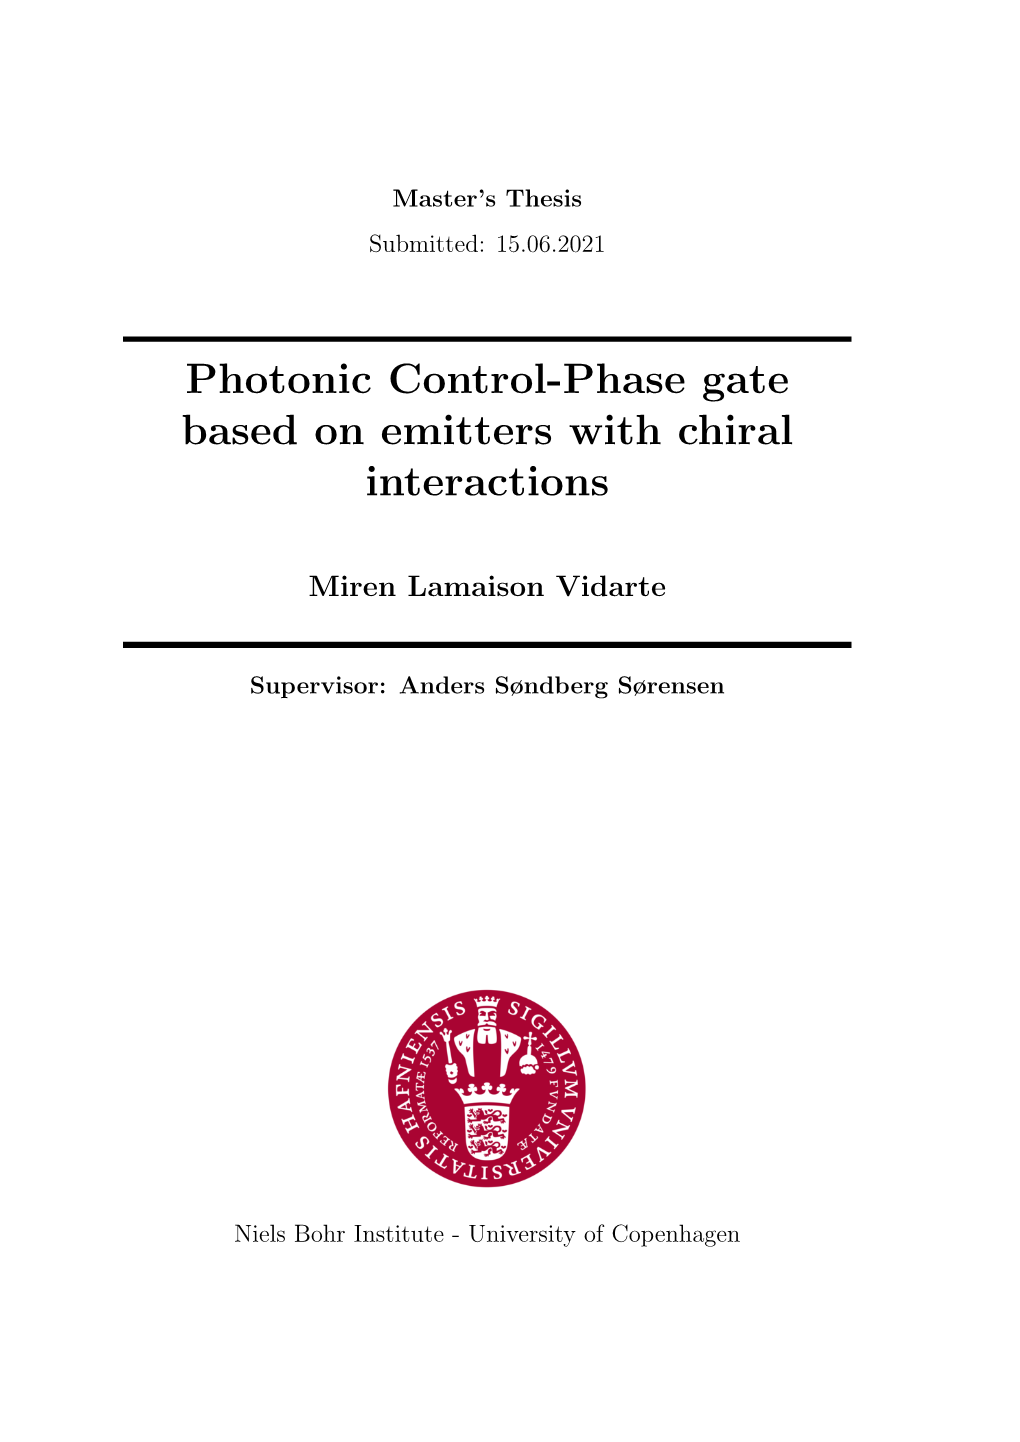 Photonic Control-Phase Gate Based on Emitters with Chiral Interactions